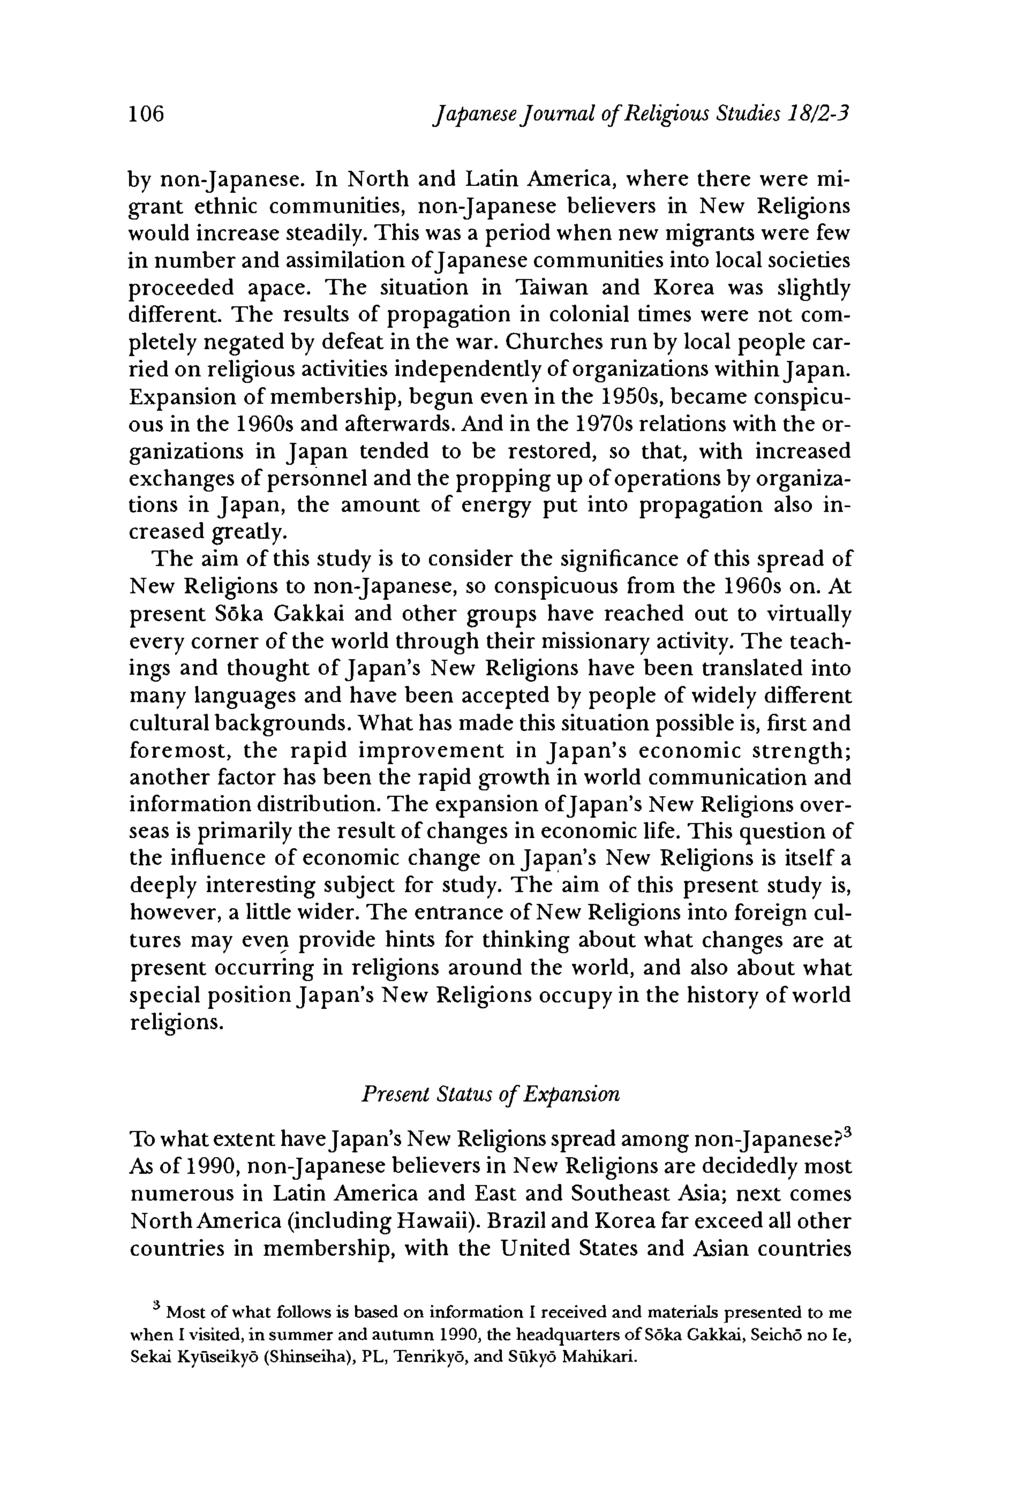 106 Japanese Journal of Religious Studies 18/2-3 by non-japanese.